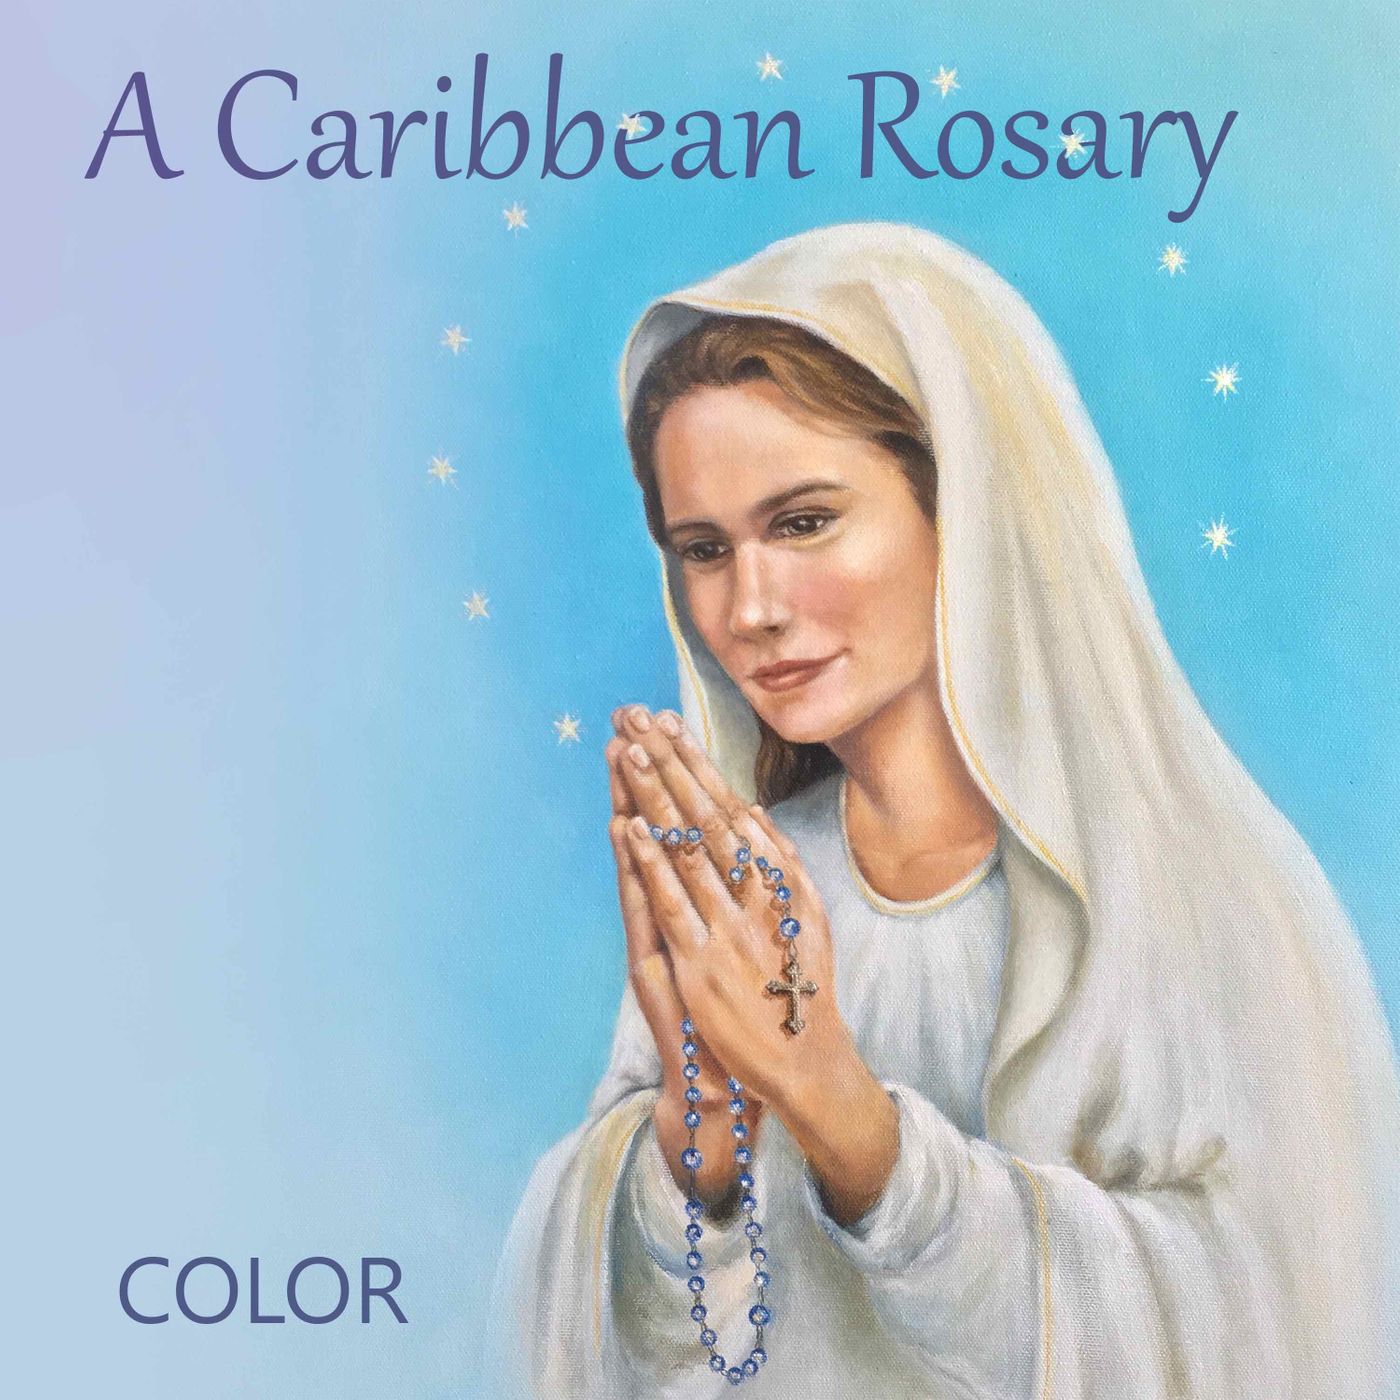 One Decade A Day: 1st Sorrowful Mystery (then from A Caribbean Rosary)